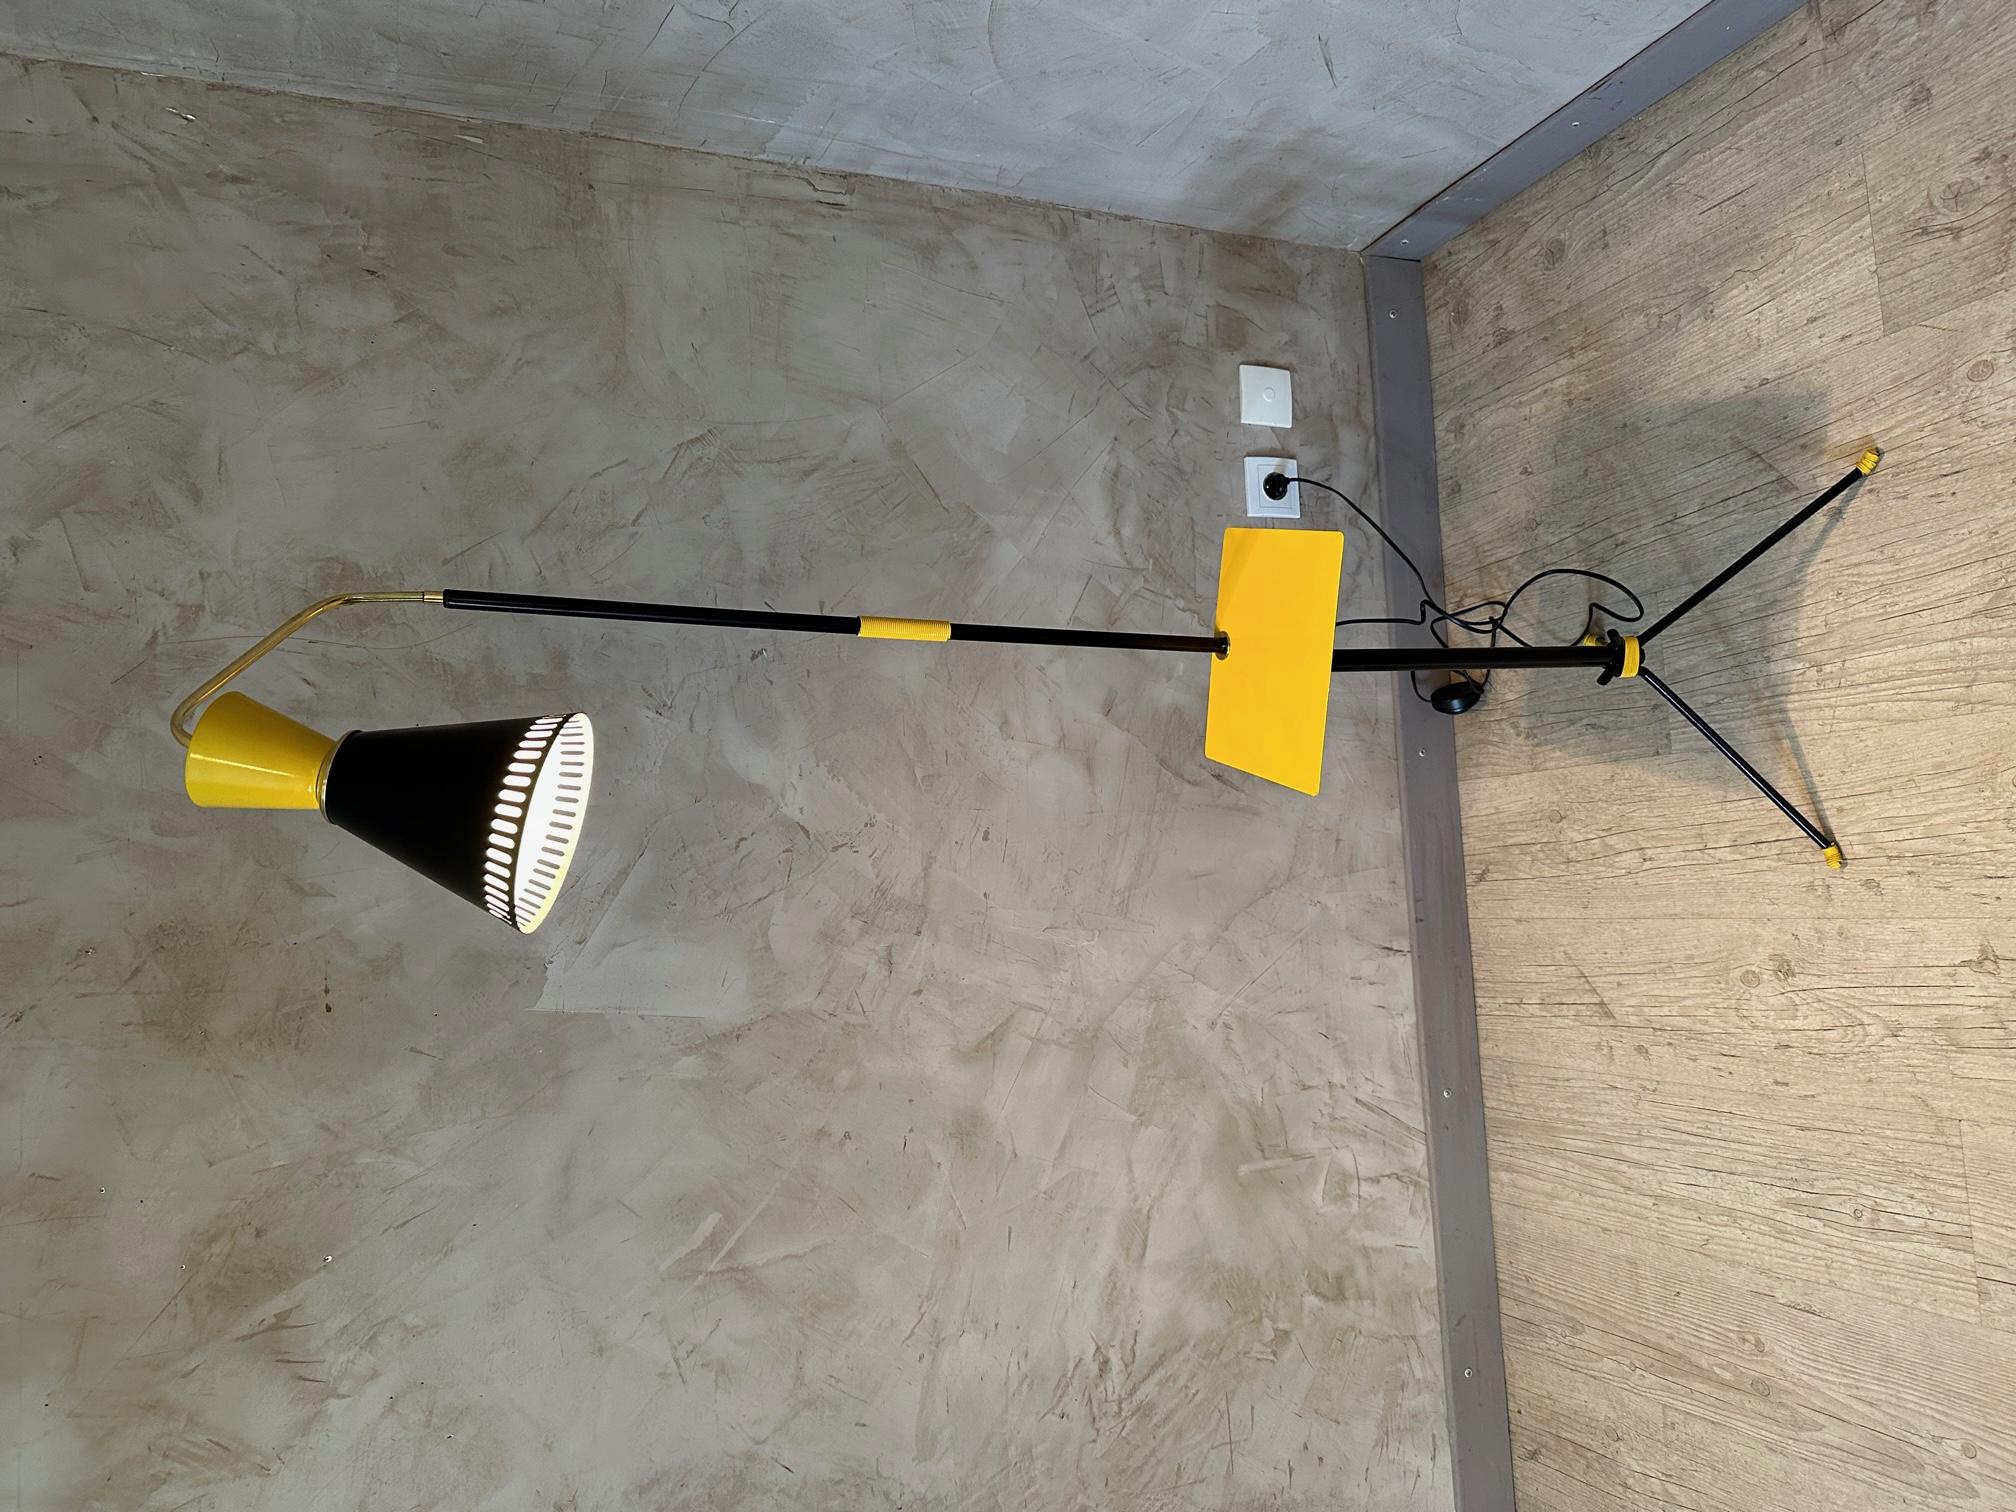 Very beautiful vintage floor lamp from the 60s in perfect black and yellow condition.
Has been rewiring by a professional.
Made of metal and brass. Yellow metal tray for placing a glass or a book.
Tripod foot. Very good quality and perfect condition.